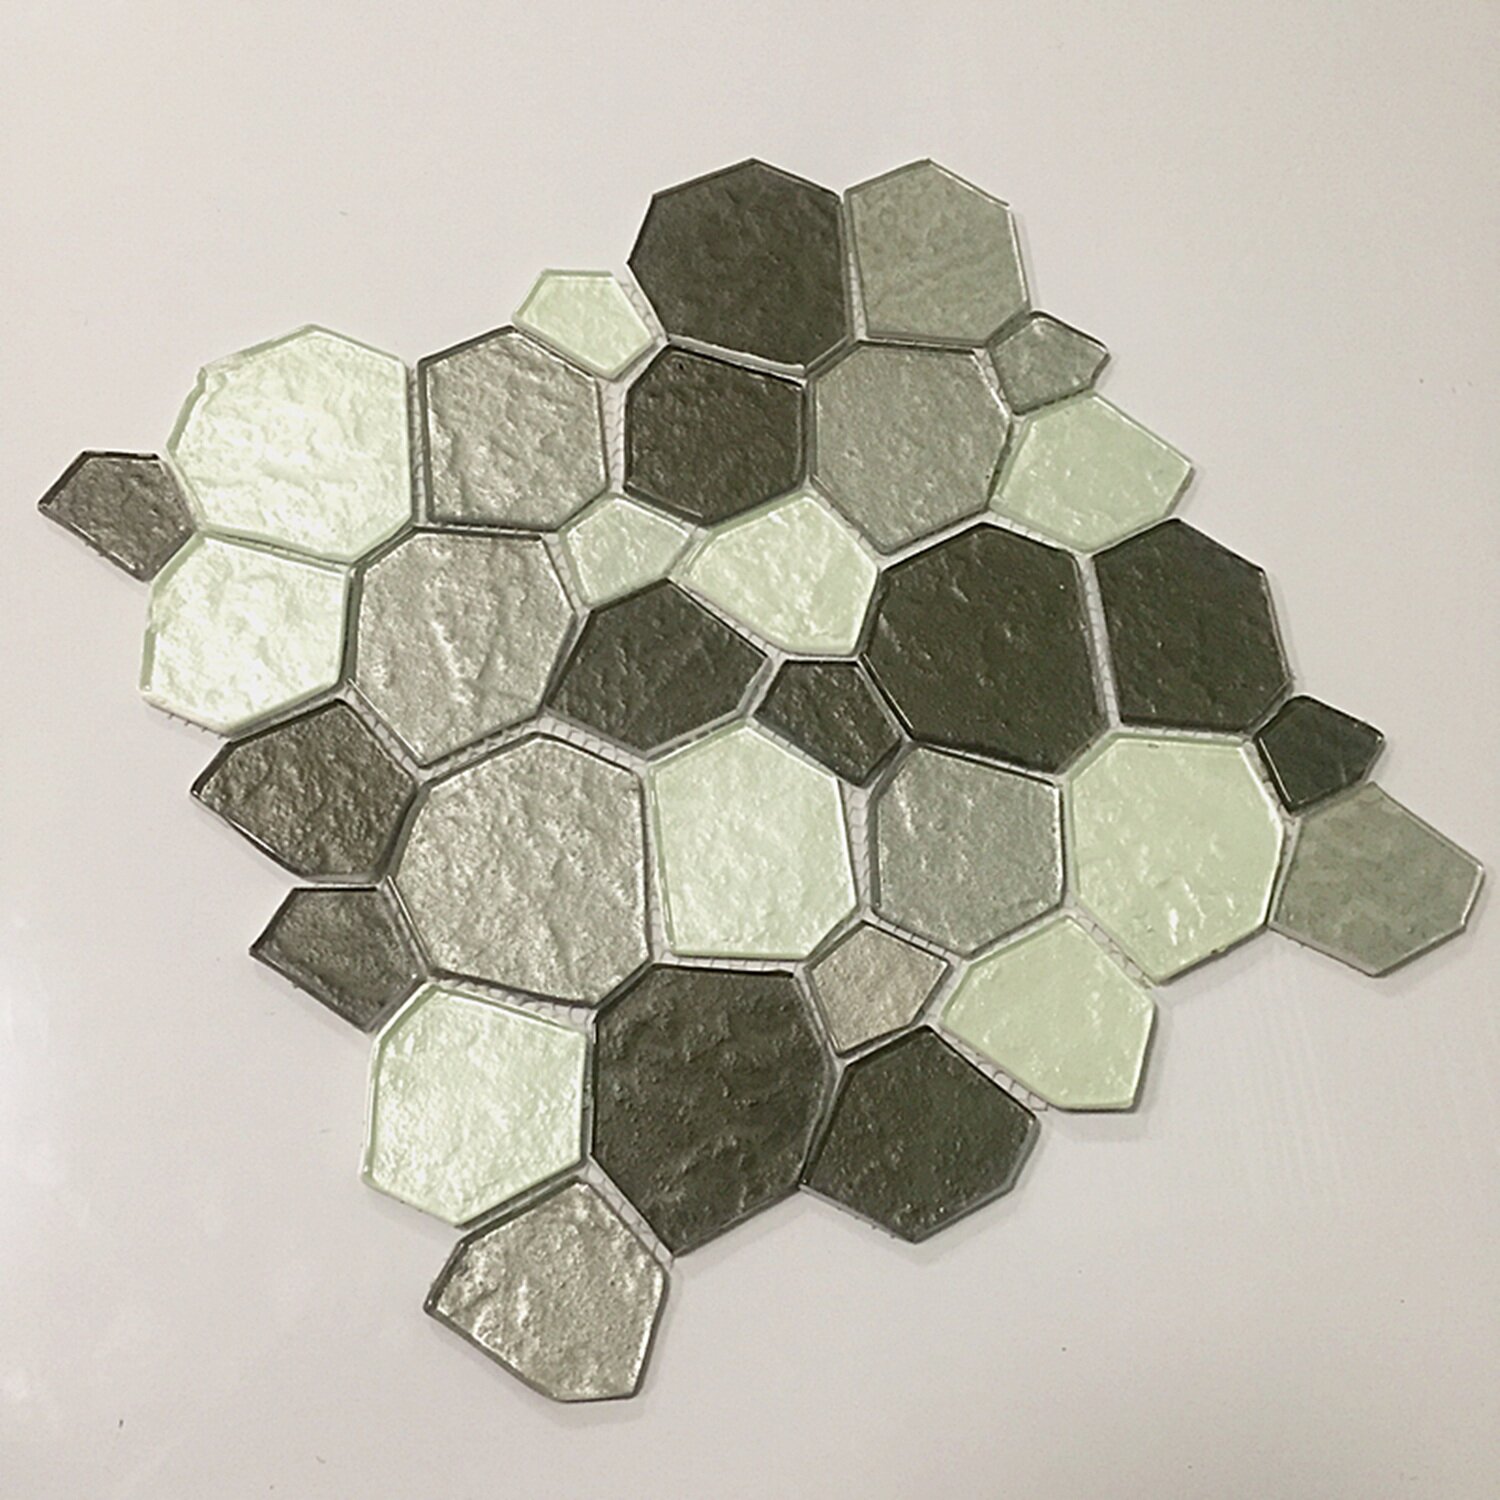 mosaic peel and stick tiles